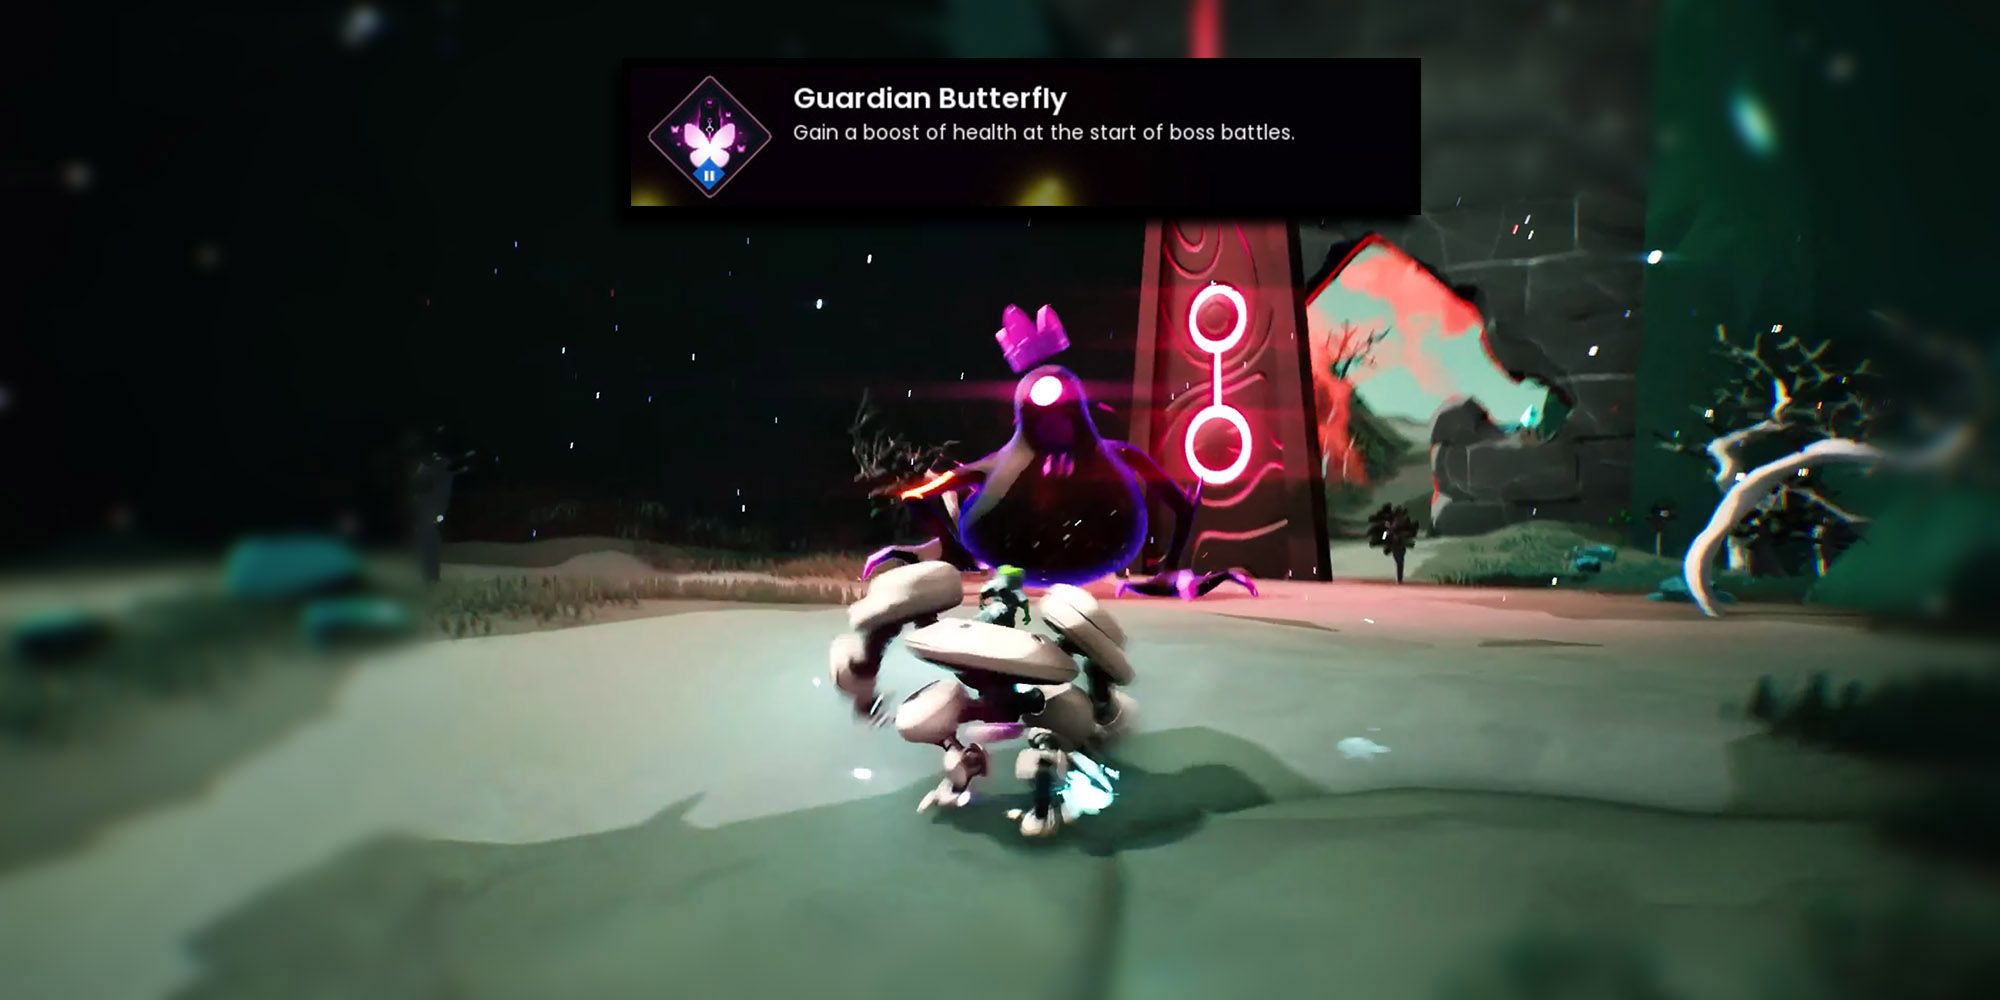 Giant's Shoulders - Frogs and robots with guardian butterflies up to watch over the boss spawn